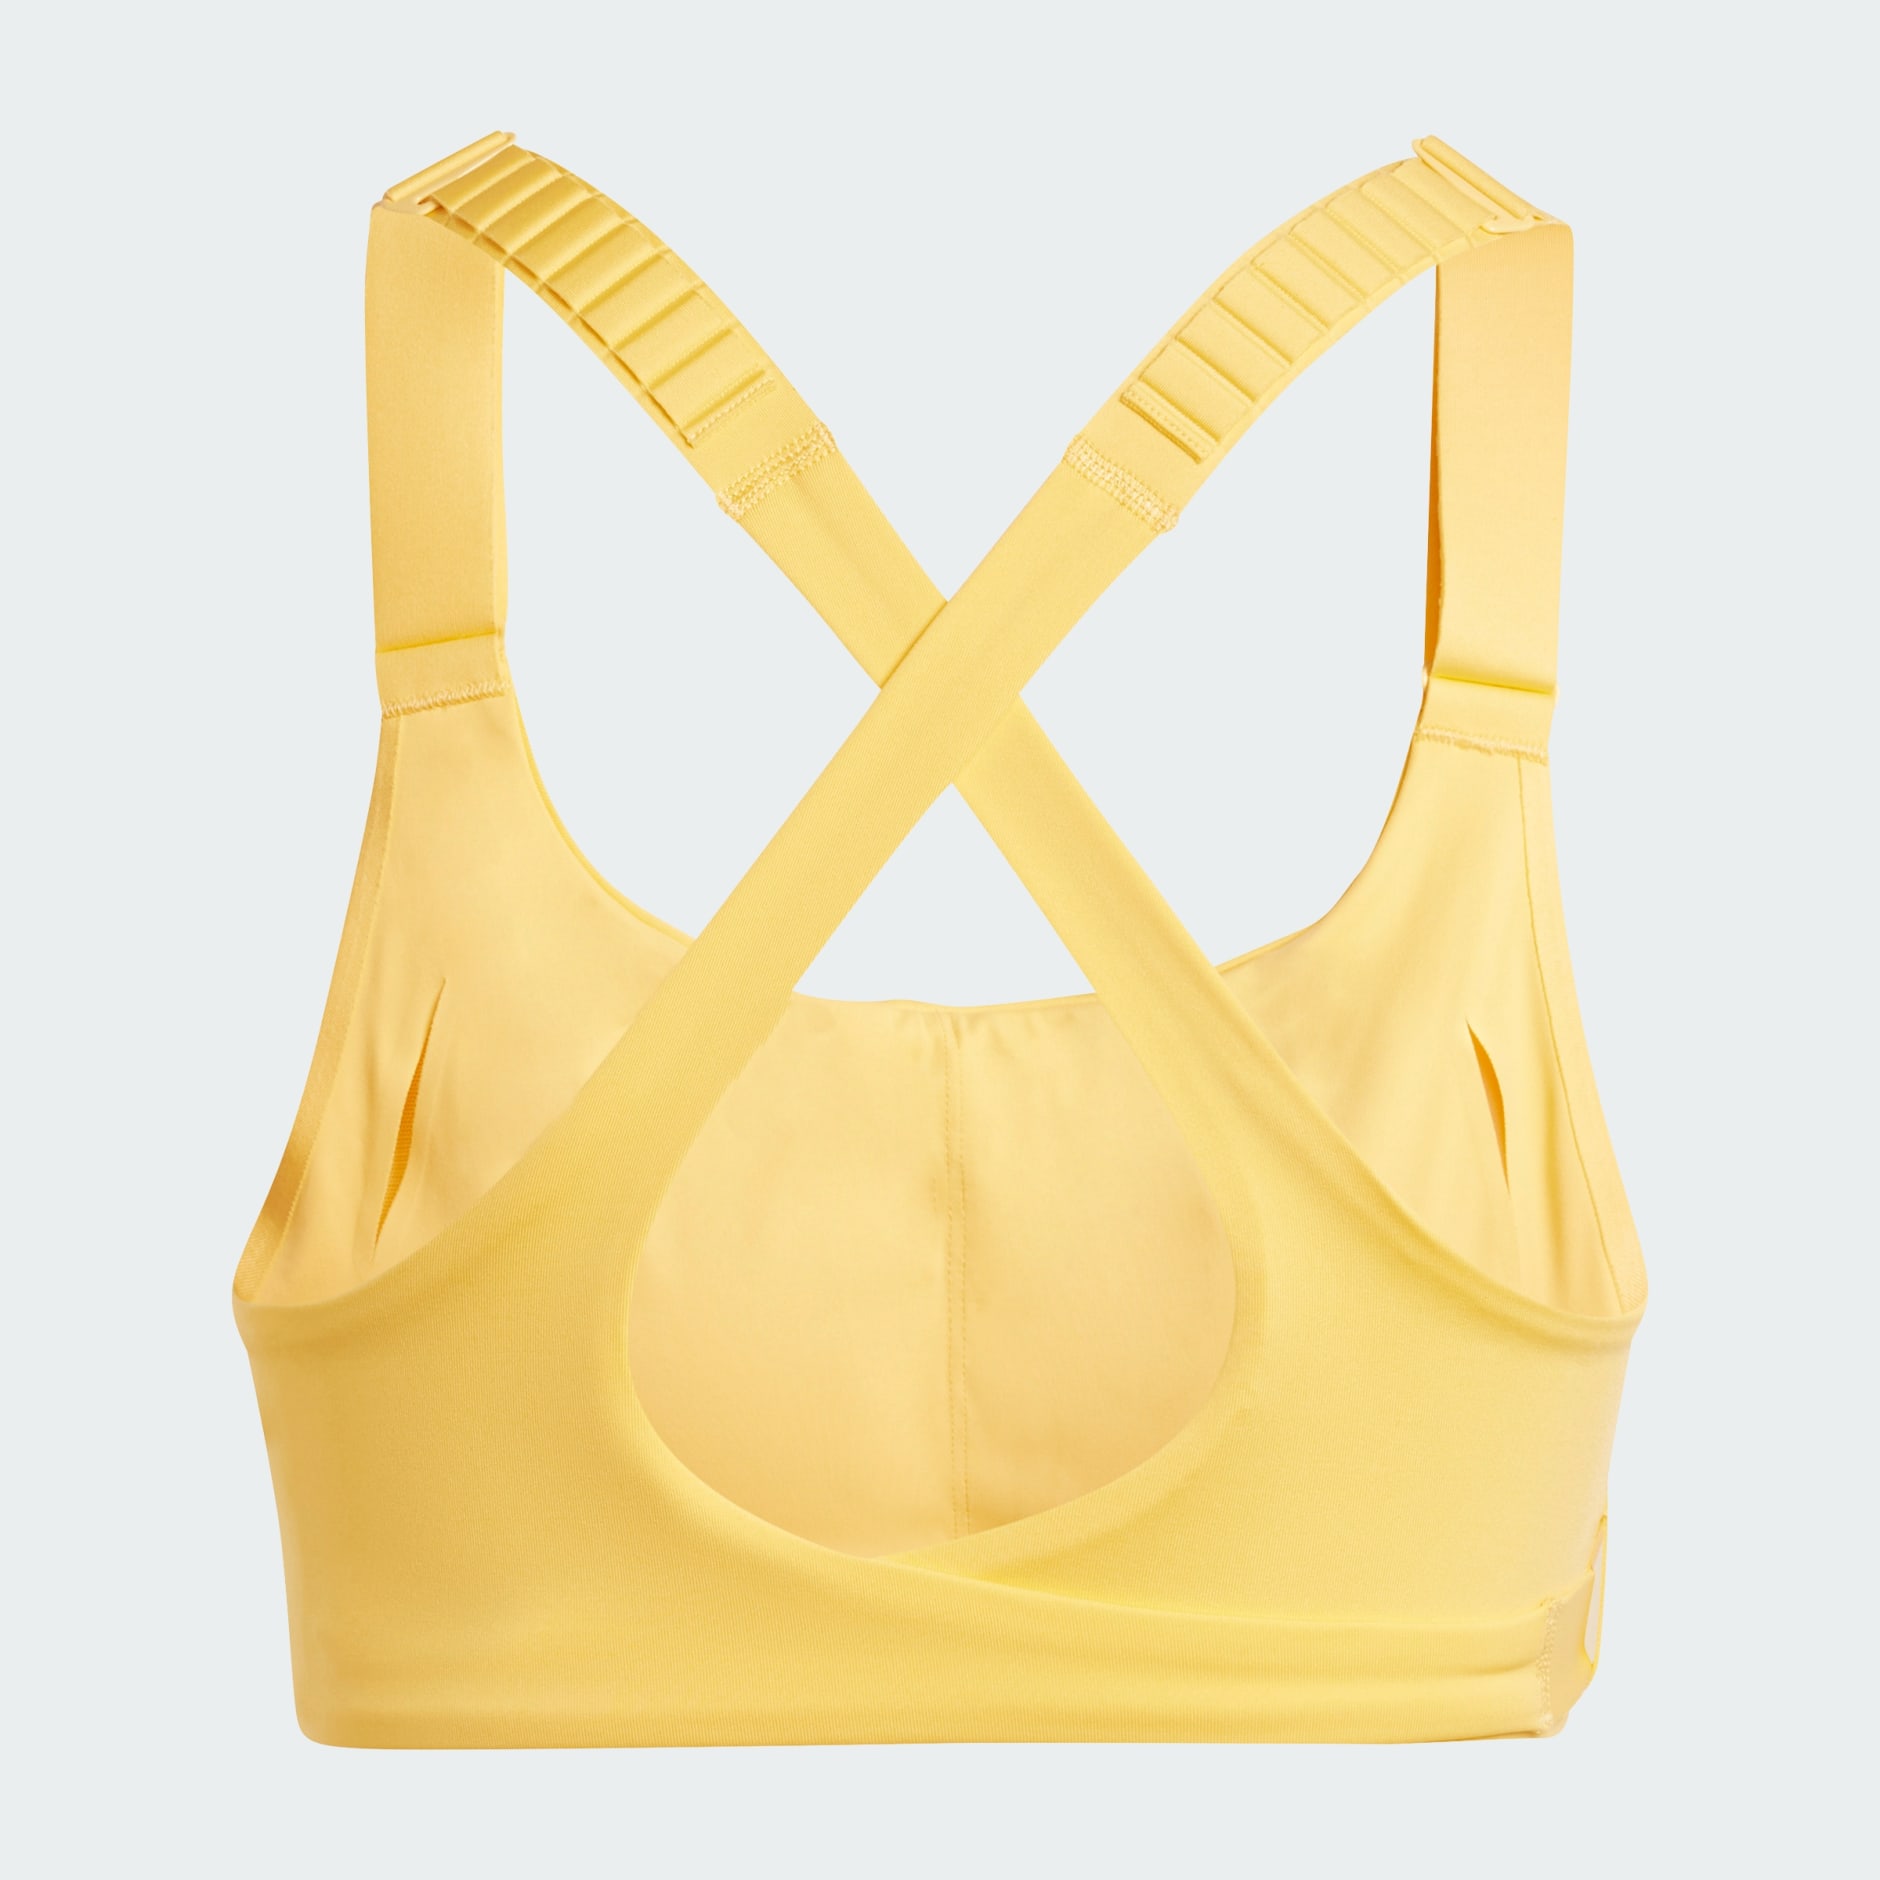 Buy ADIDAS fastimpact luxe run high-support sports bra Online